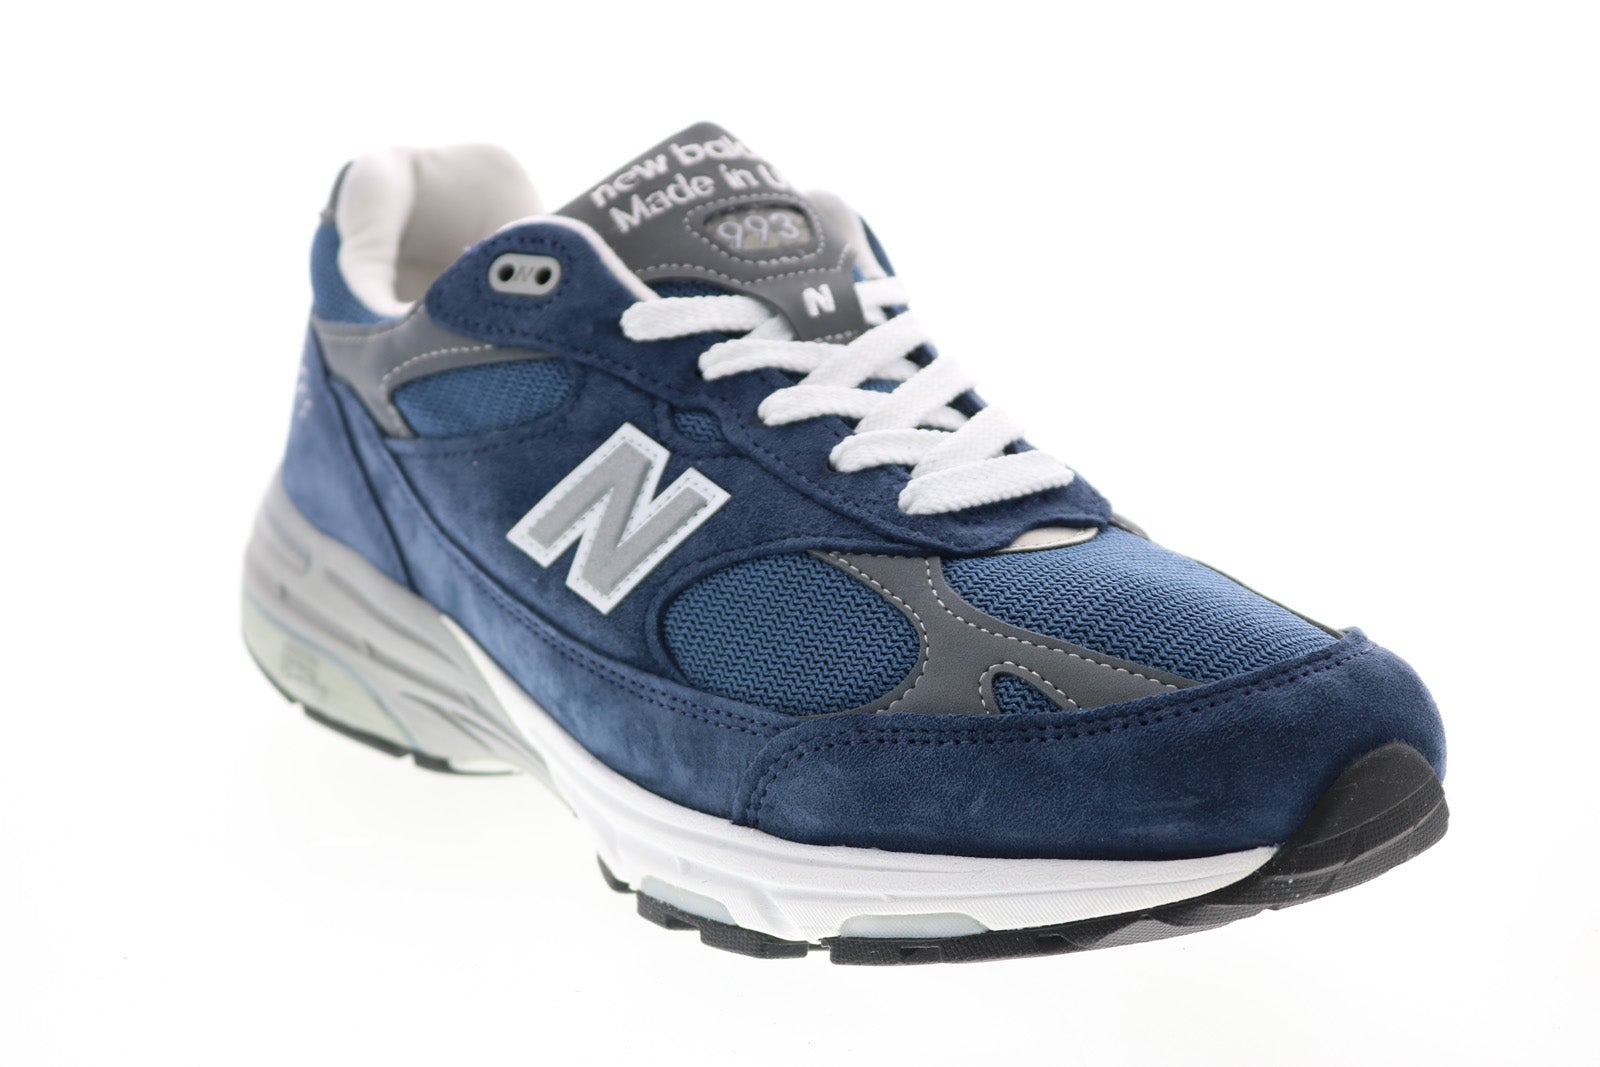 New Balance 993 MR993VI Mens Blue Suede Lifestyle Sneakers Shoes